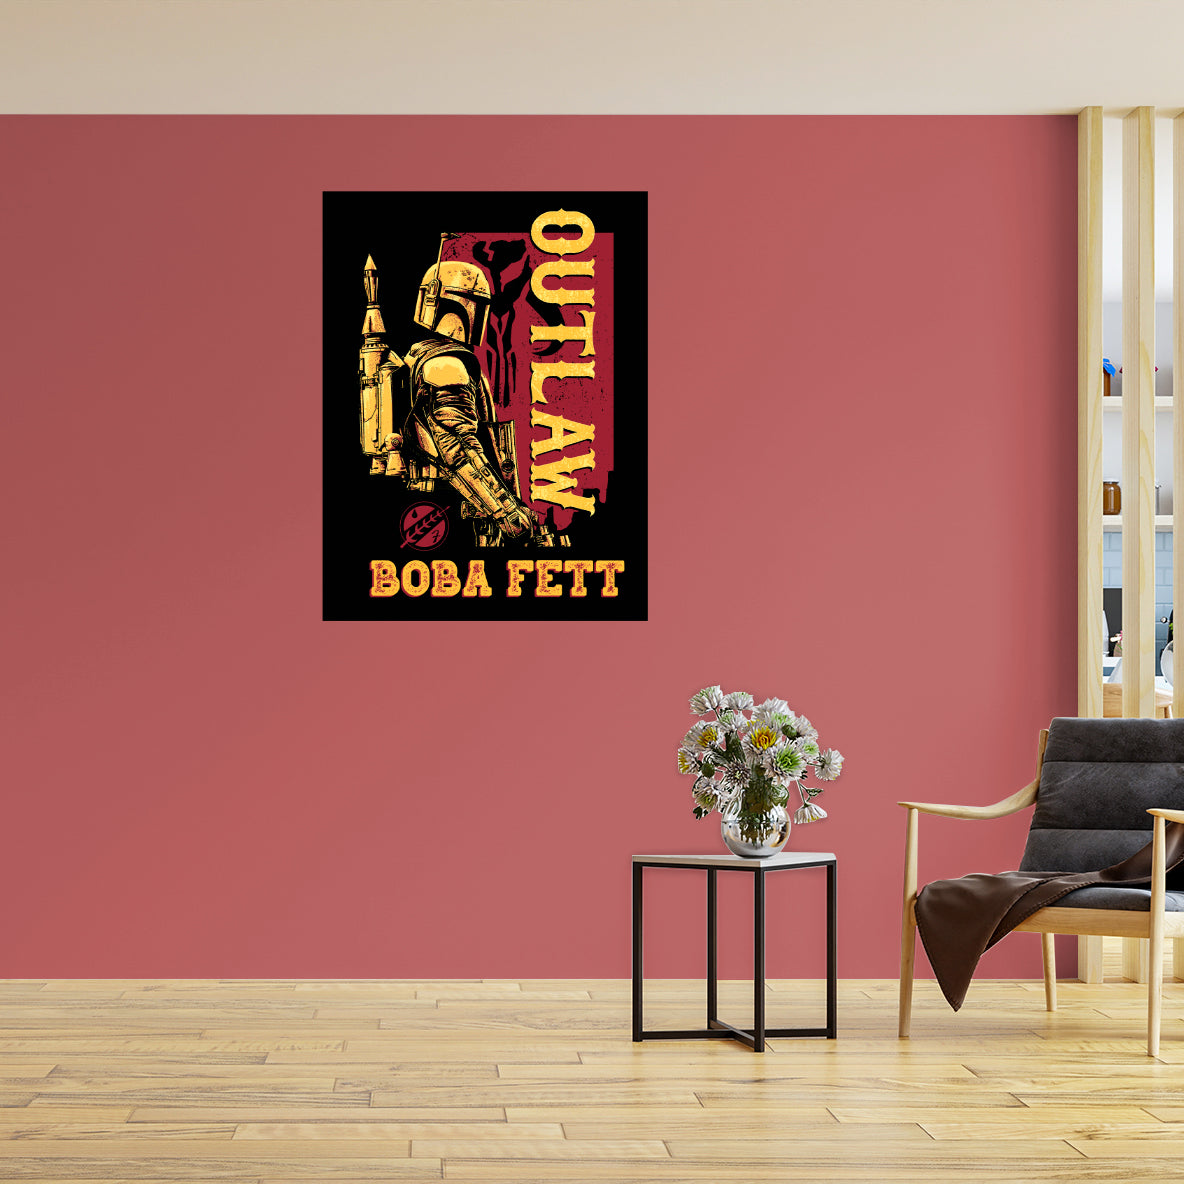 Book of Boba Fett: Boba Fett Outlaw Poster - Officially Licensed Star Wars Removable Adhesive Decal